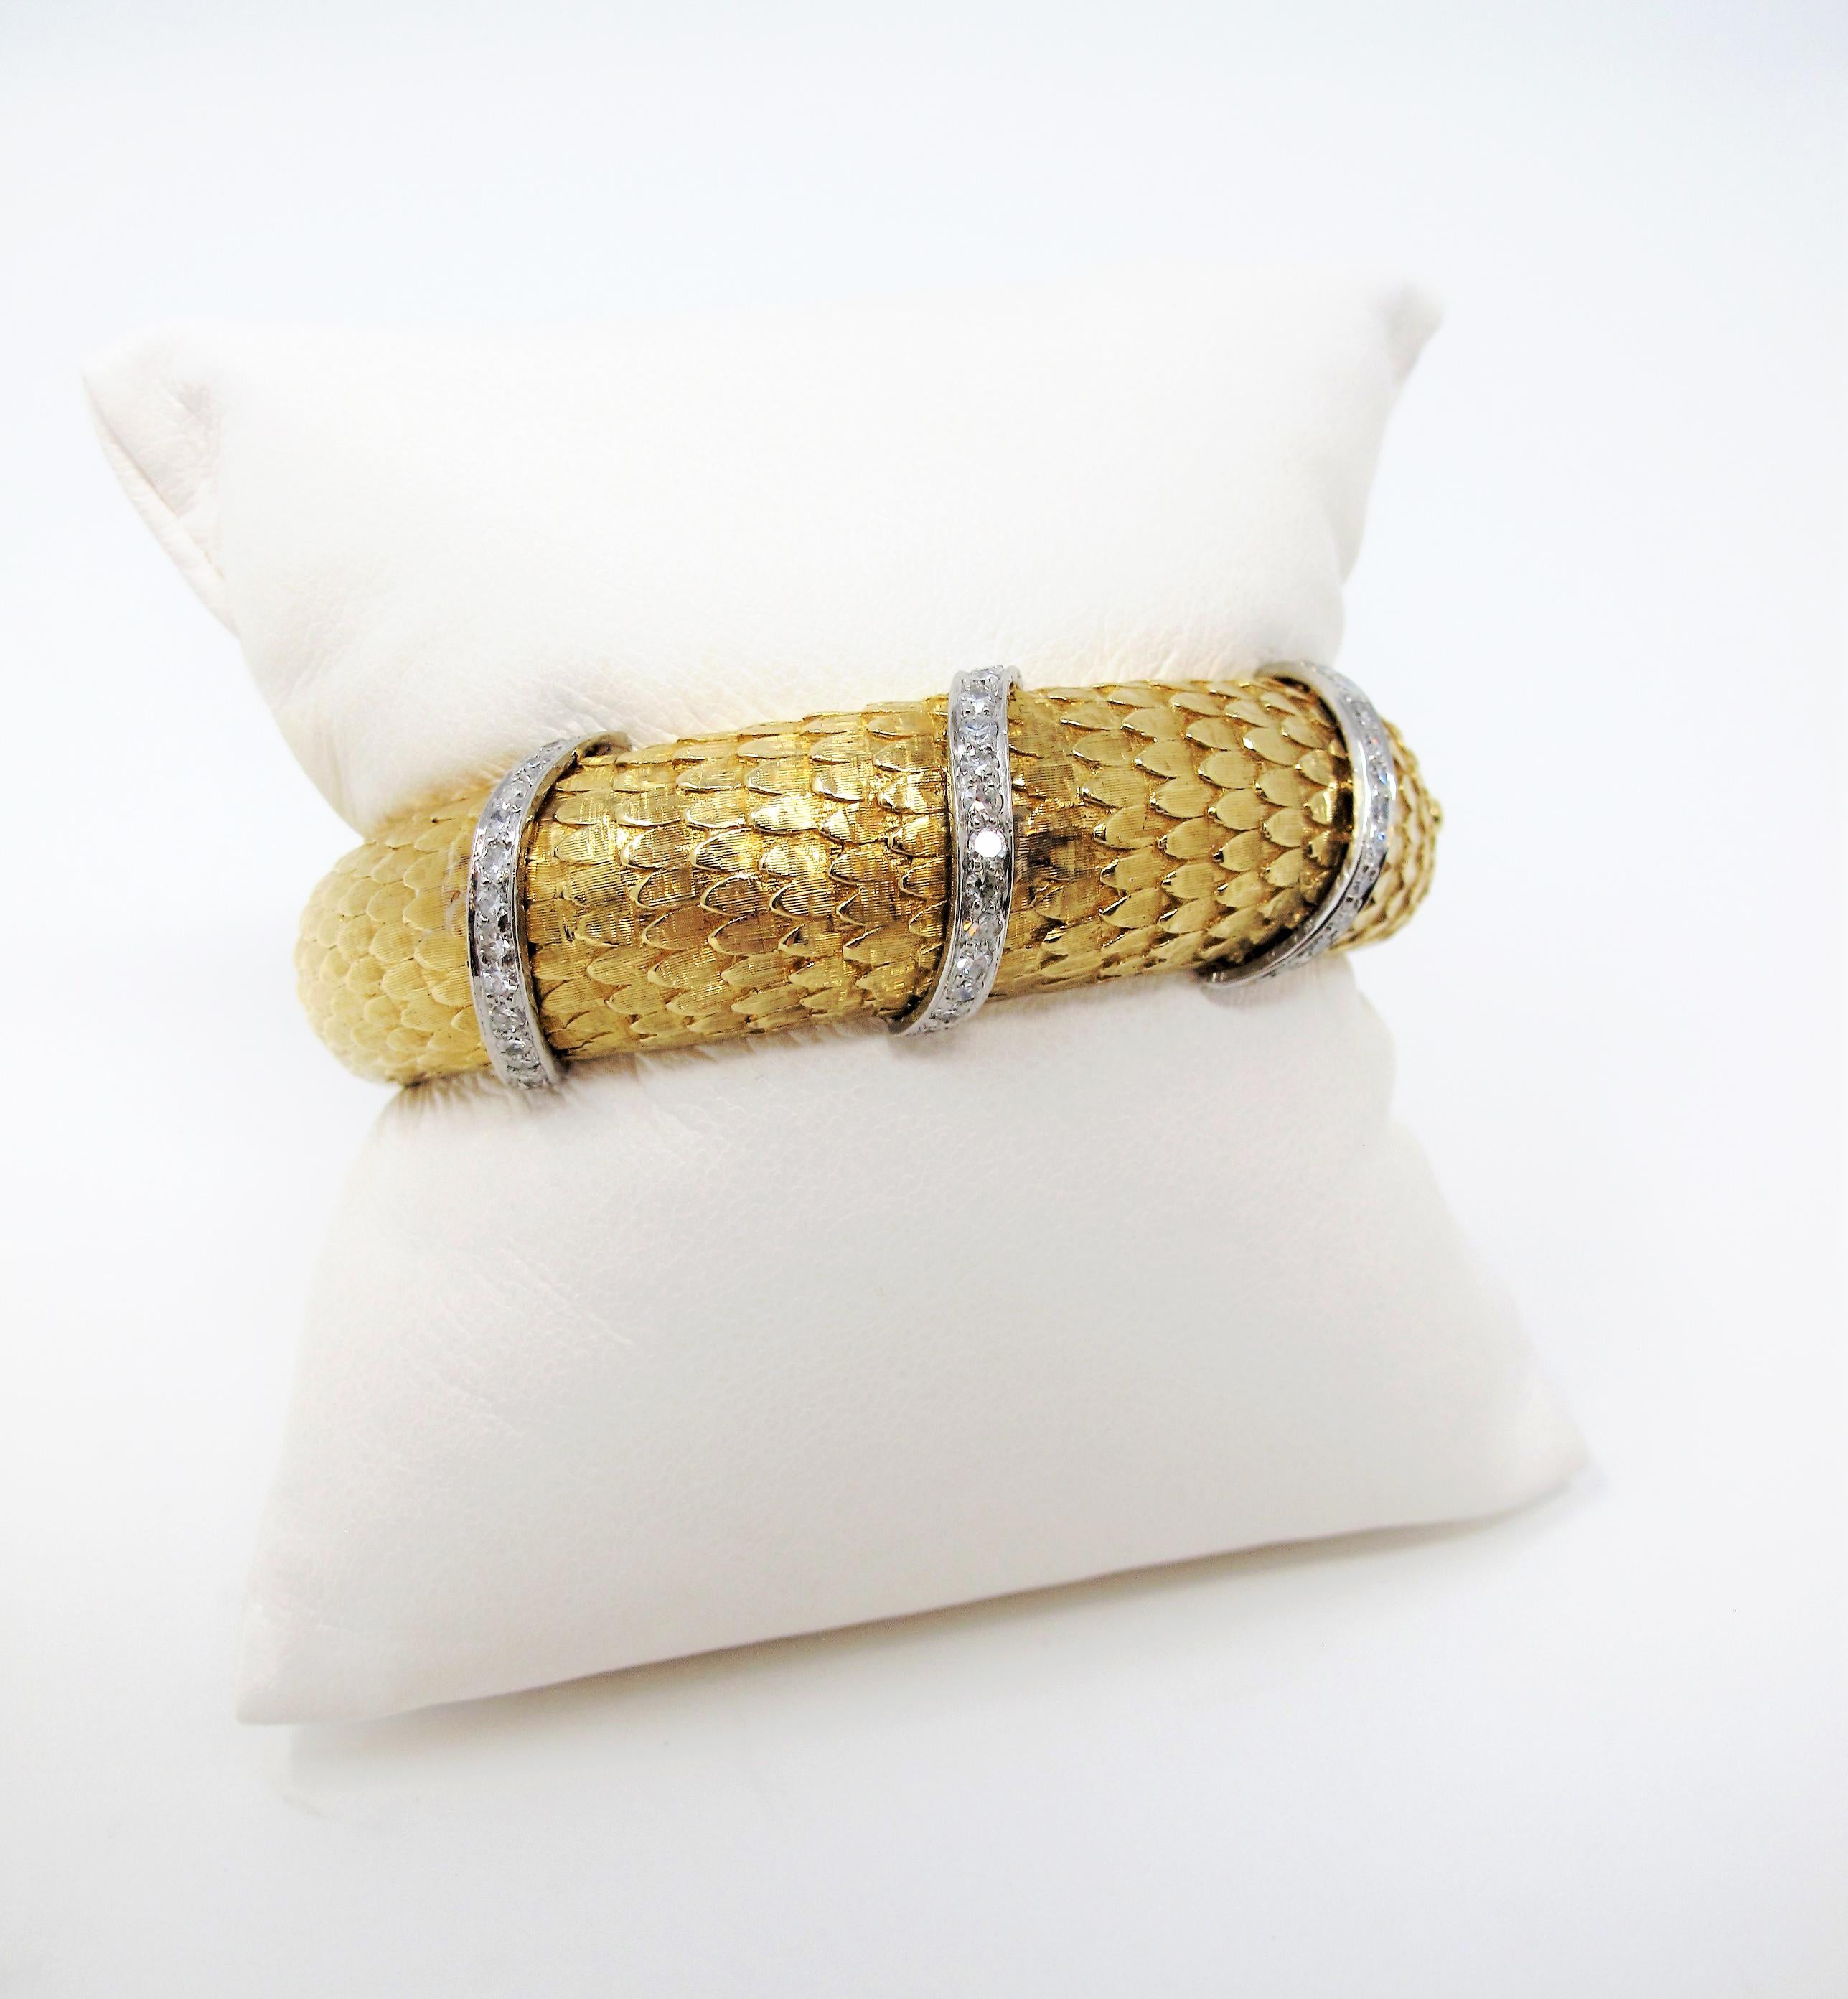 Scaled Hinged Cuff Bracelet in 18 Karat Yellow Gold with Pave Diamond Wraps 1